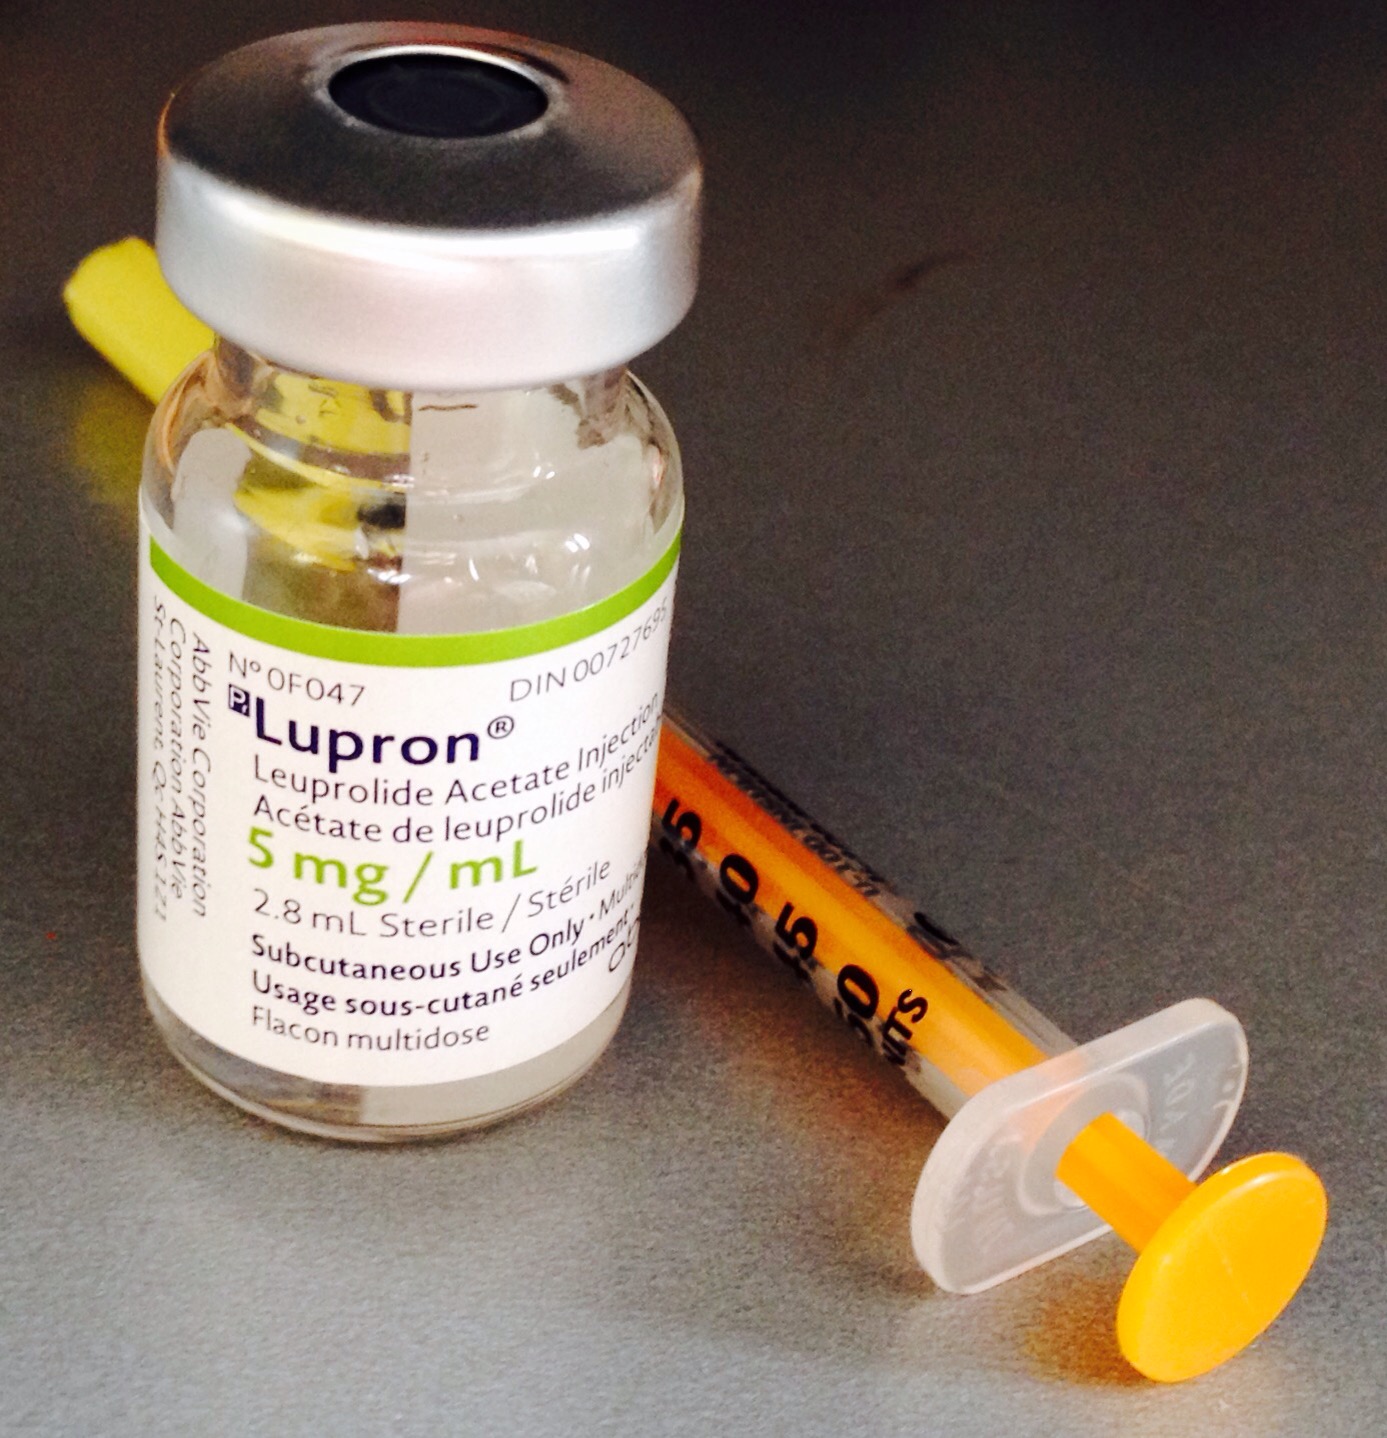 Lupron injection for treatment of endometriosis